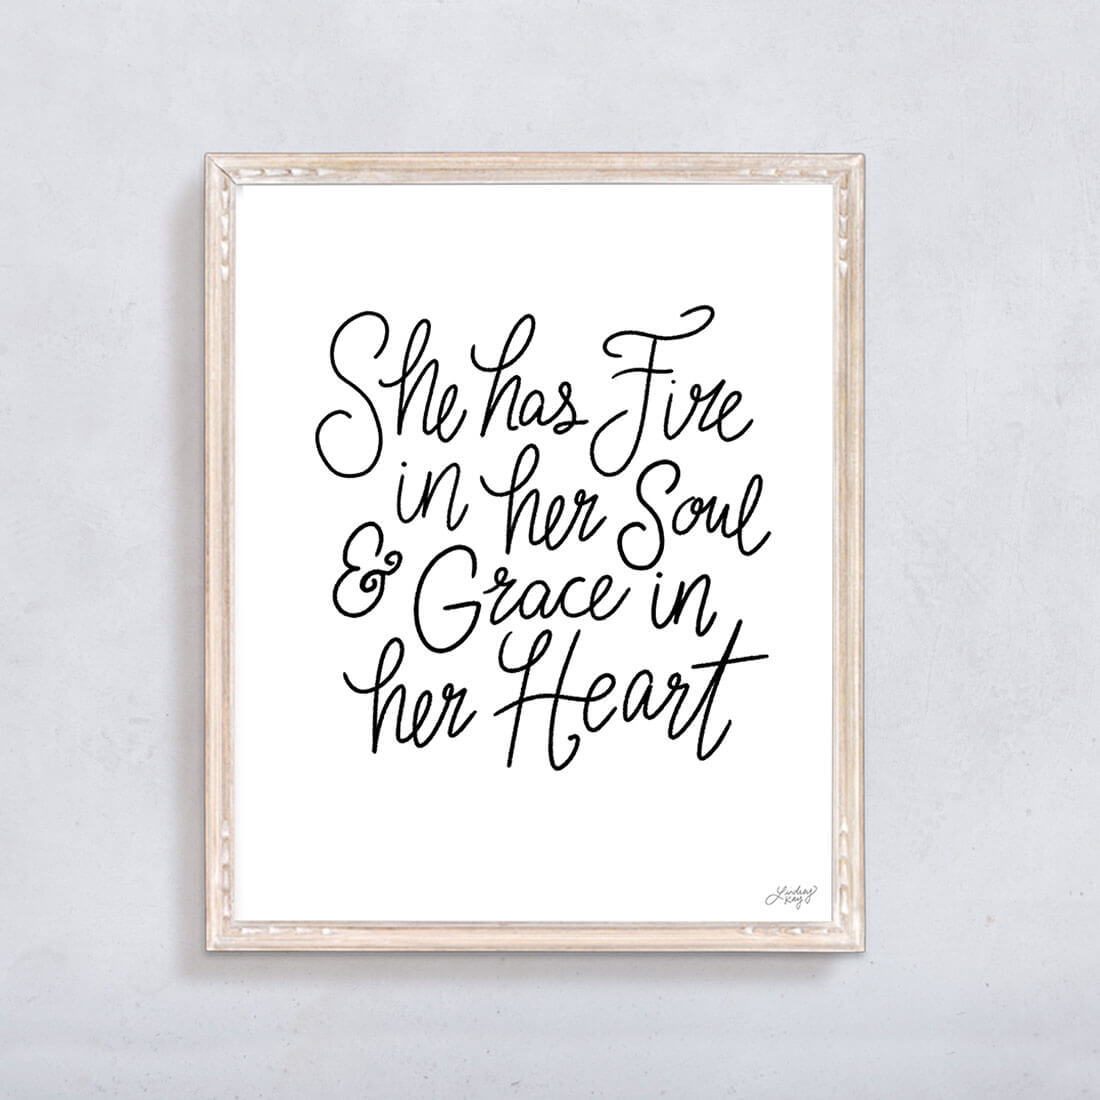 fire in her soul, grace in her heart, art print, hand-drawn lettering, wall art, black and white, lindsey kay co